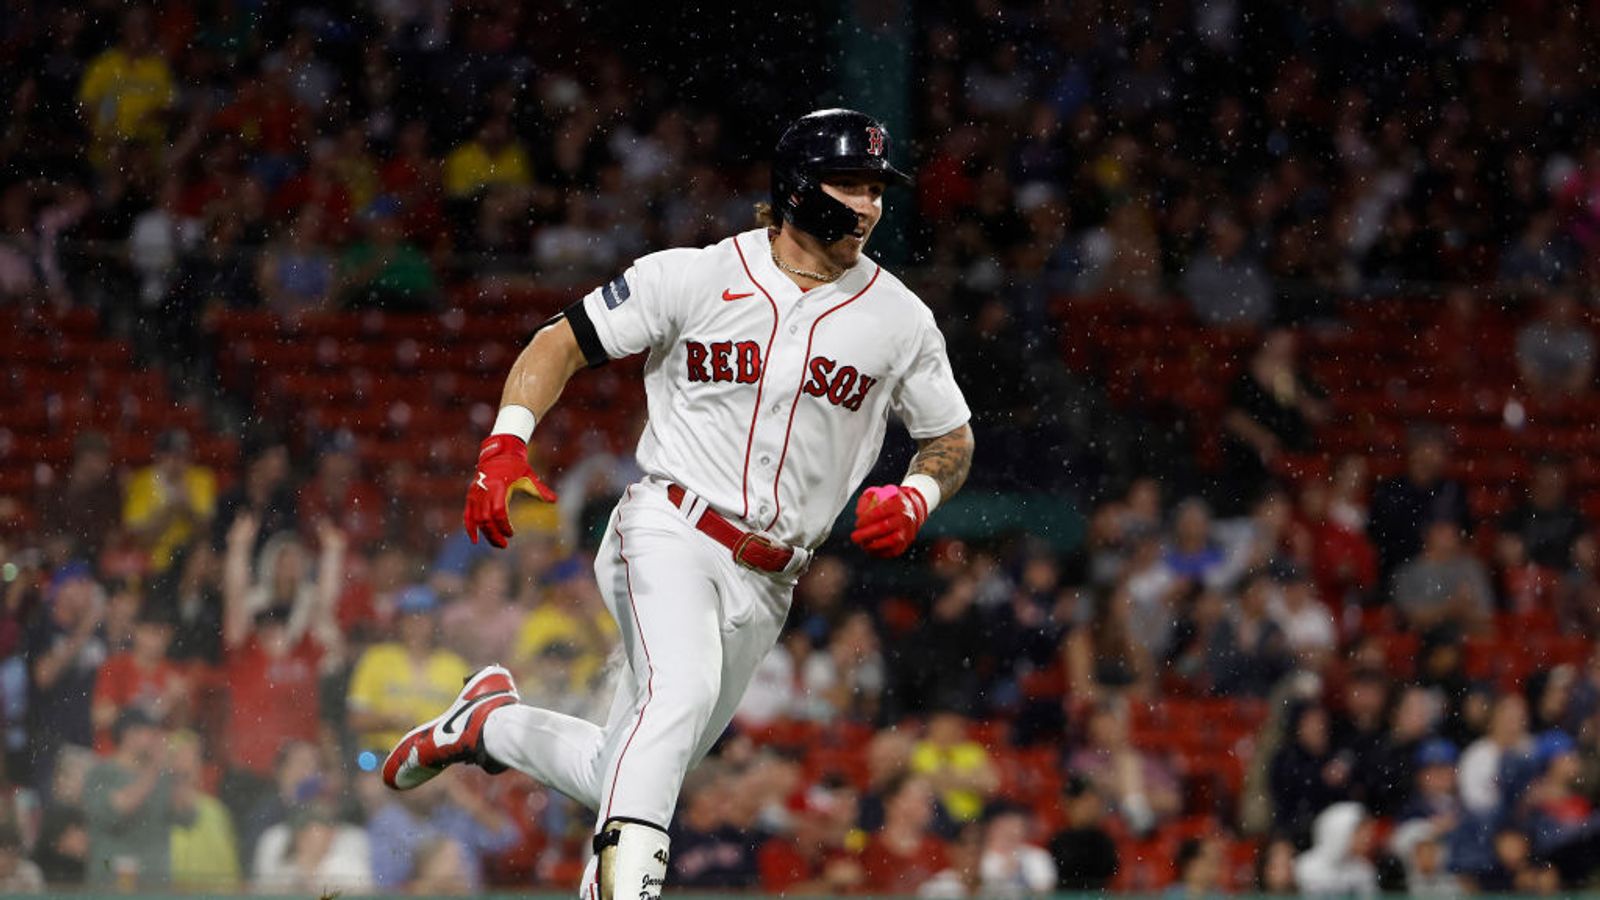 Adam Duvall earns MLB honor after historic start with Red Sox